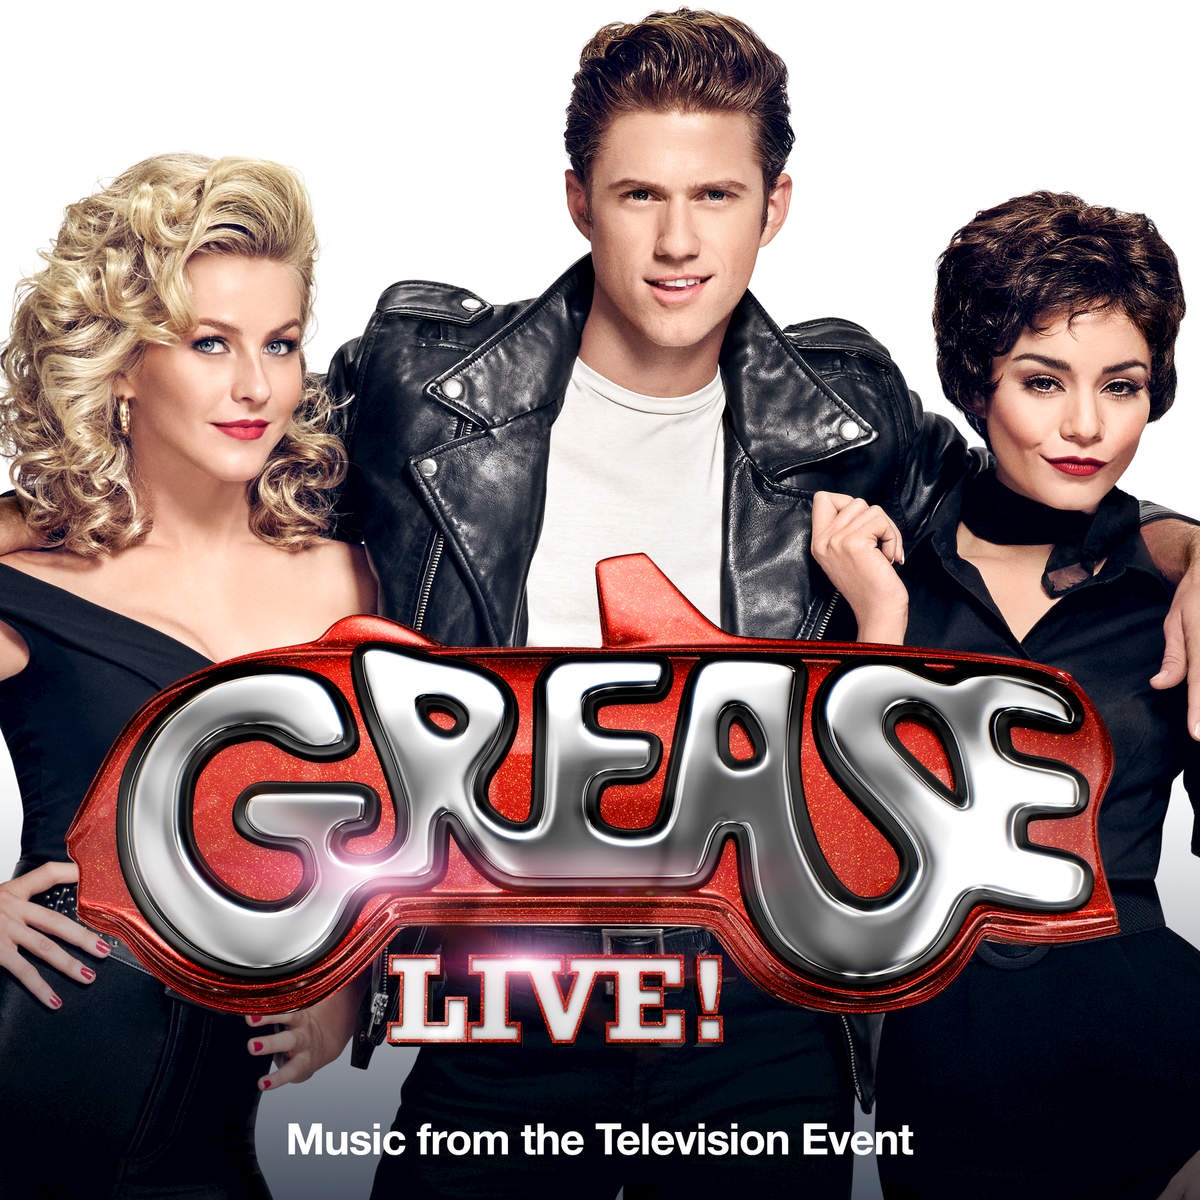 Hopelessly Devoted To You - From "Grease Live!" Music From The Television Event